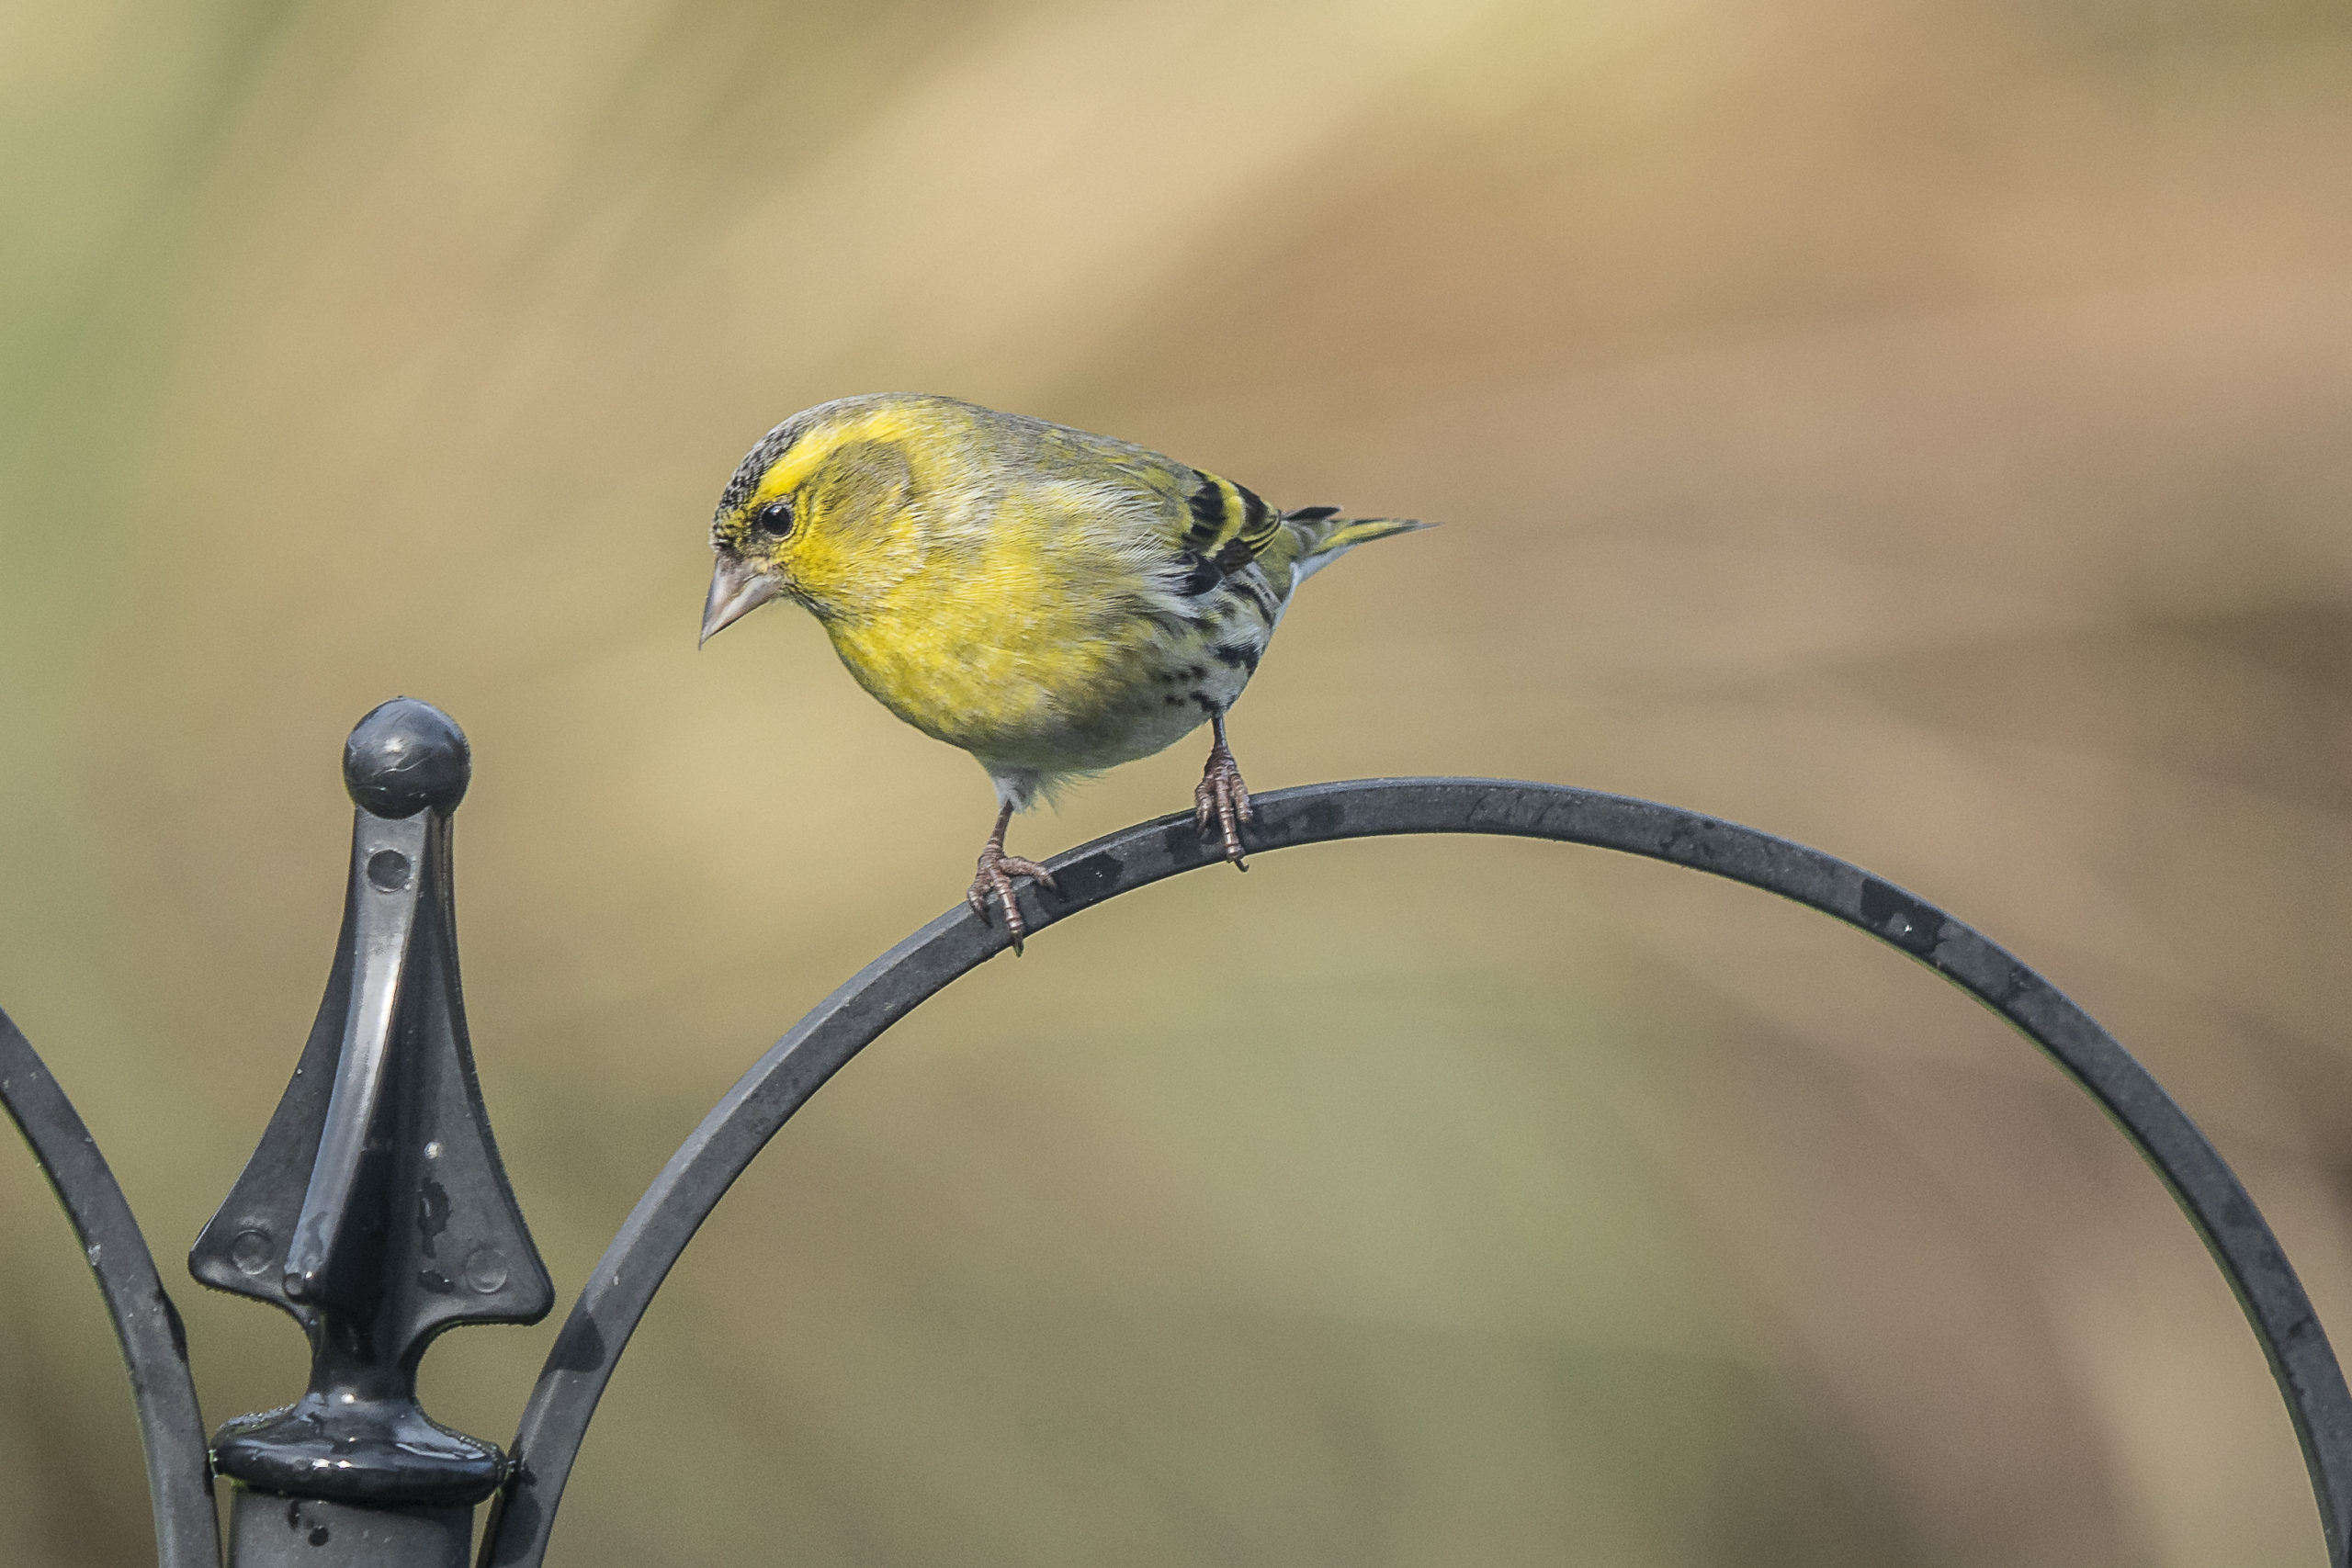 David Lawson's picture of a yellow siskin.